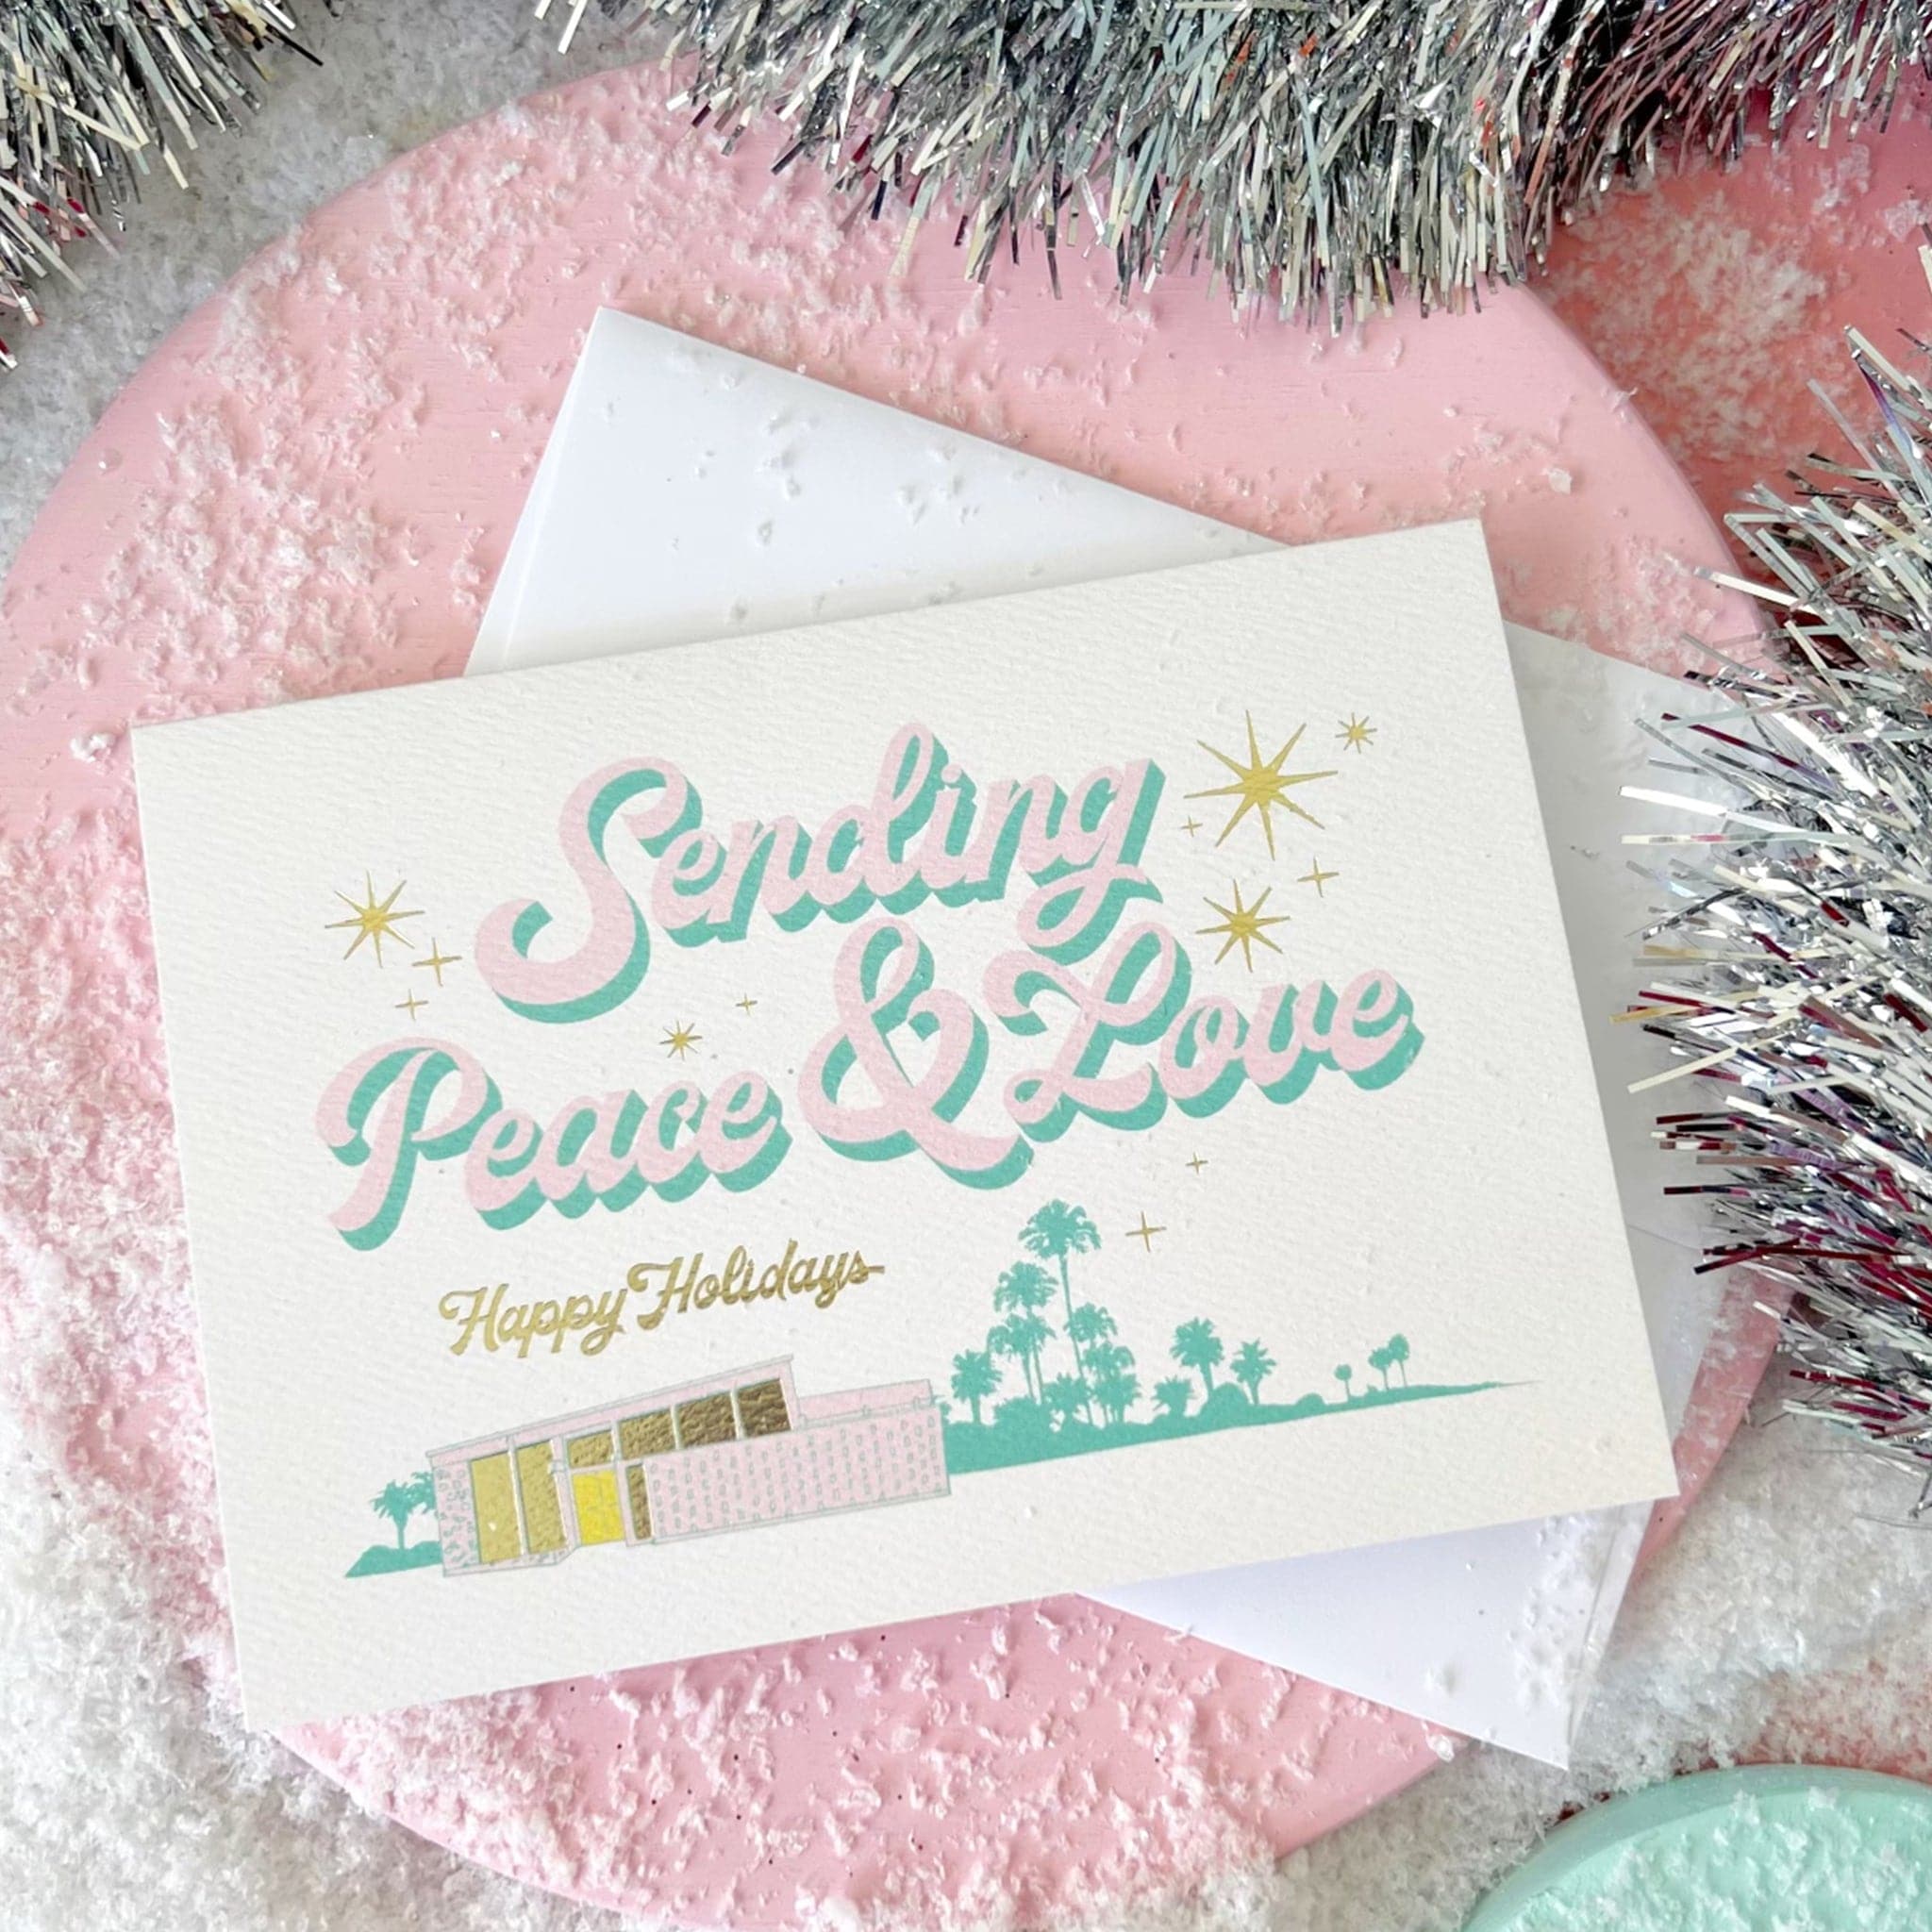 A cream card with pink letters outlined in turquoise that read, "Sending Peace & Love" along with a graphic of a midcentury house in front of desert palms and gold foiled letters that read, "Happy Holidays". 